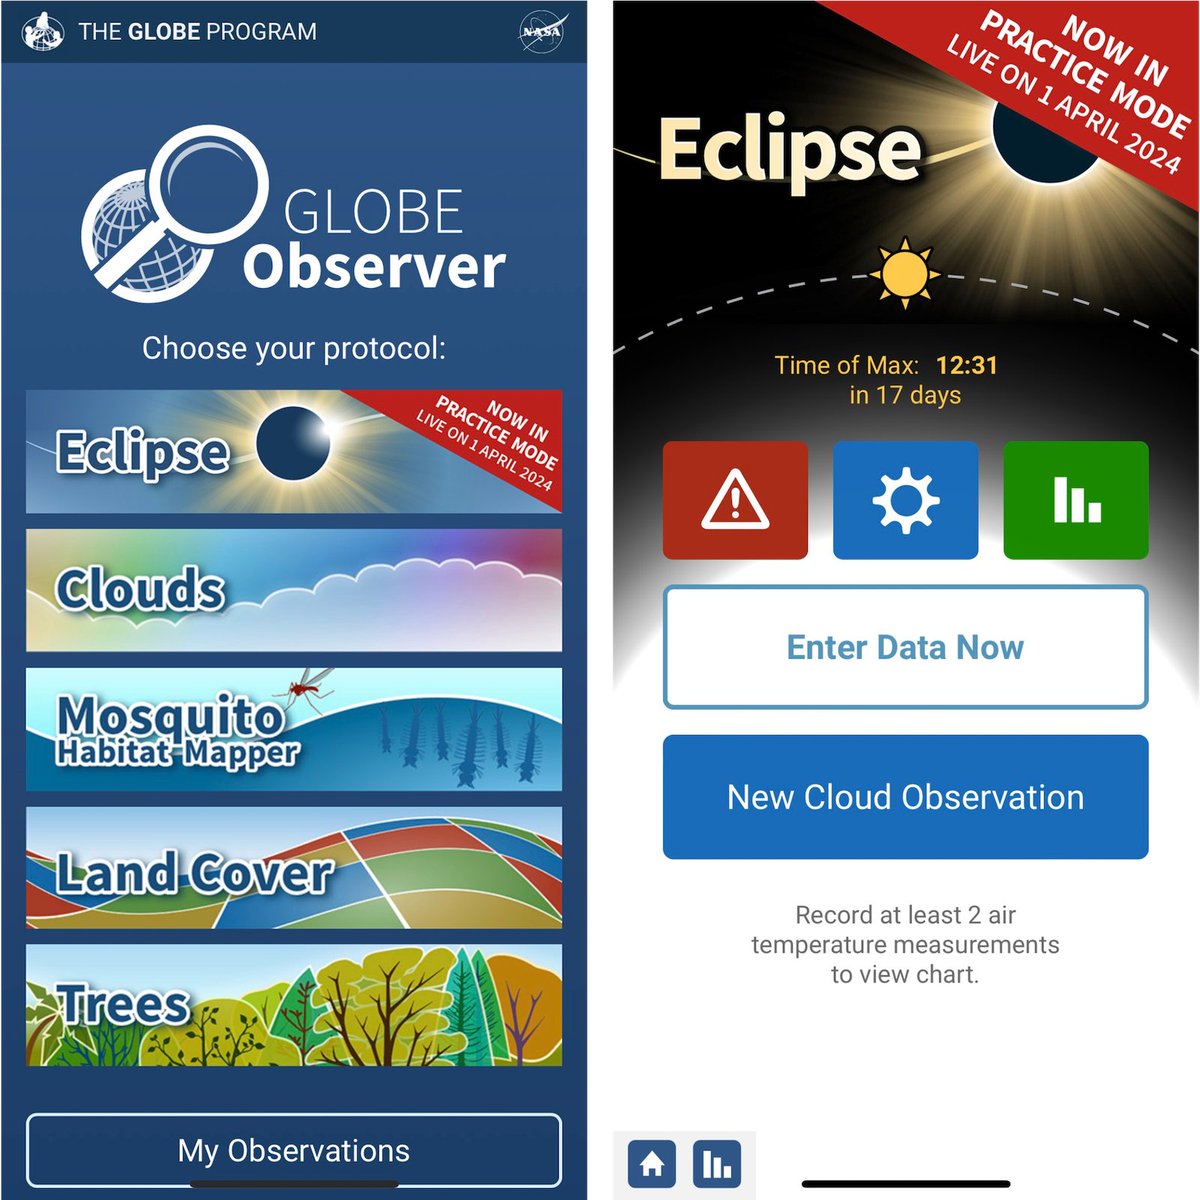 Solar eclipse countdown: T-5 days! Don’t wait until April 8th to install the @GLOBEProgram Observer App on your smartphone. Make some practice observations today and prepare to Do NASA Science, wherever you are, during the total solar eclipse: bit.ly/3TRiAMR #CitSciMonth